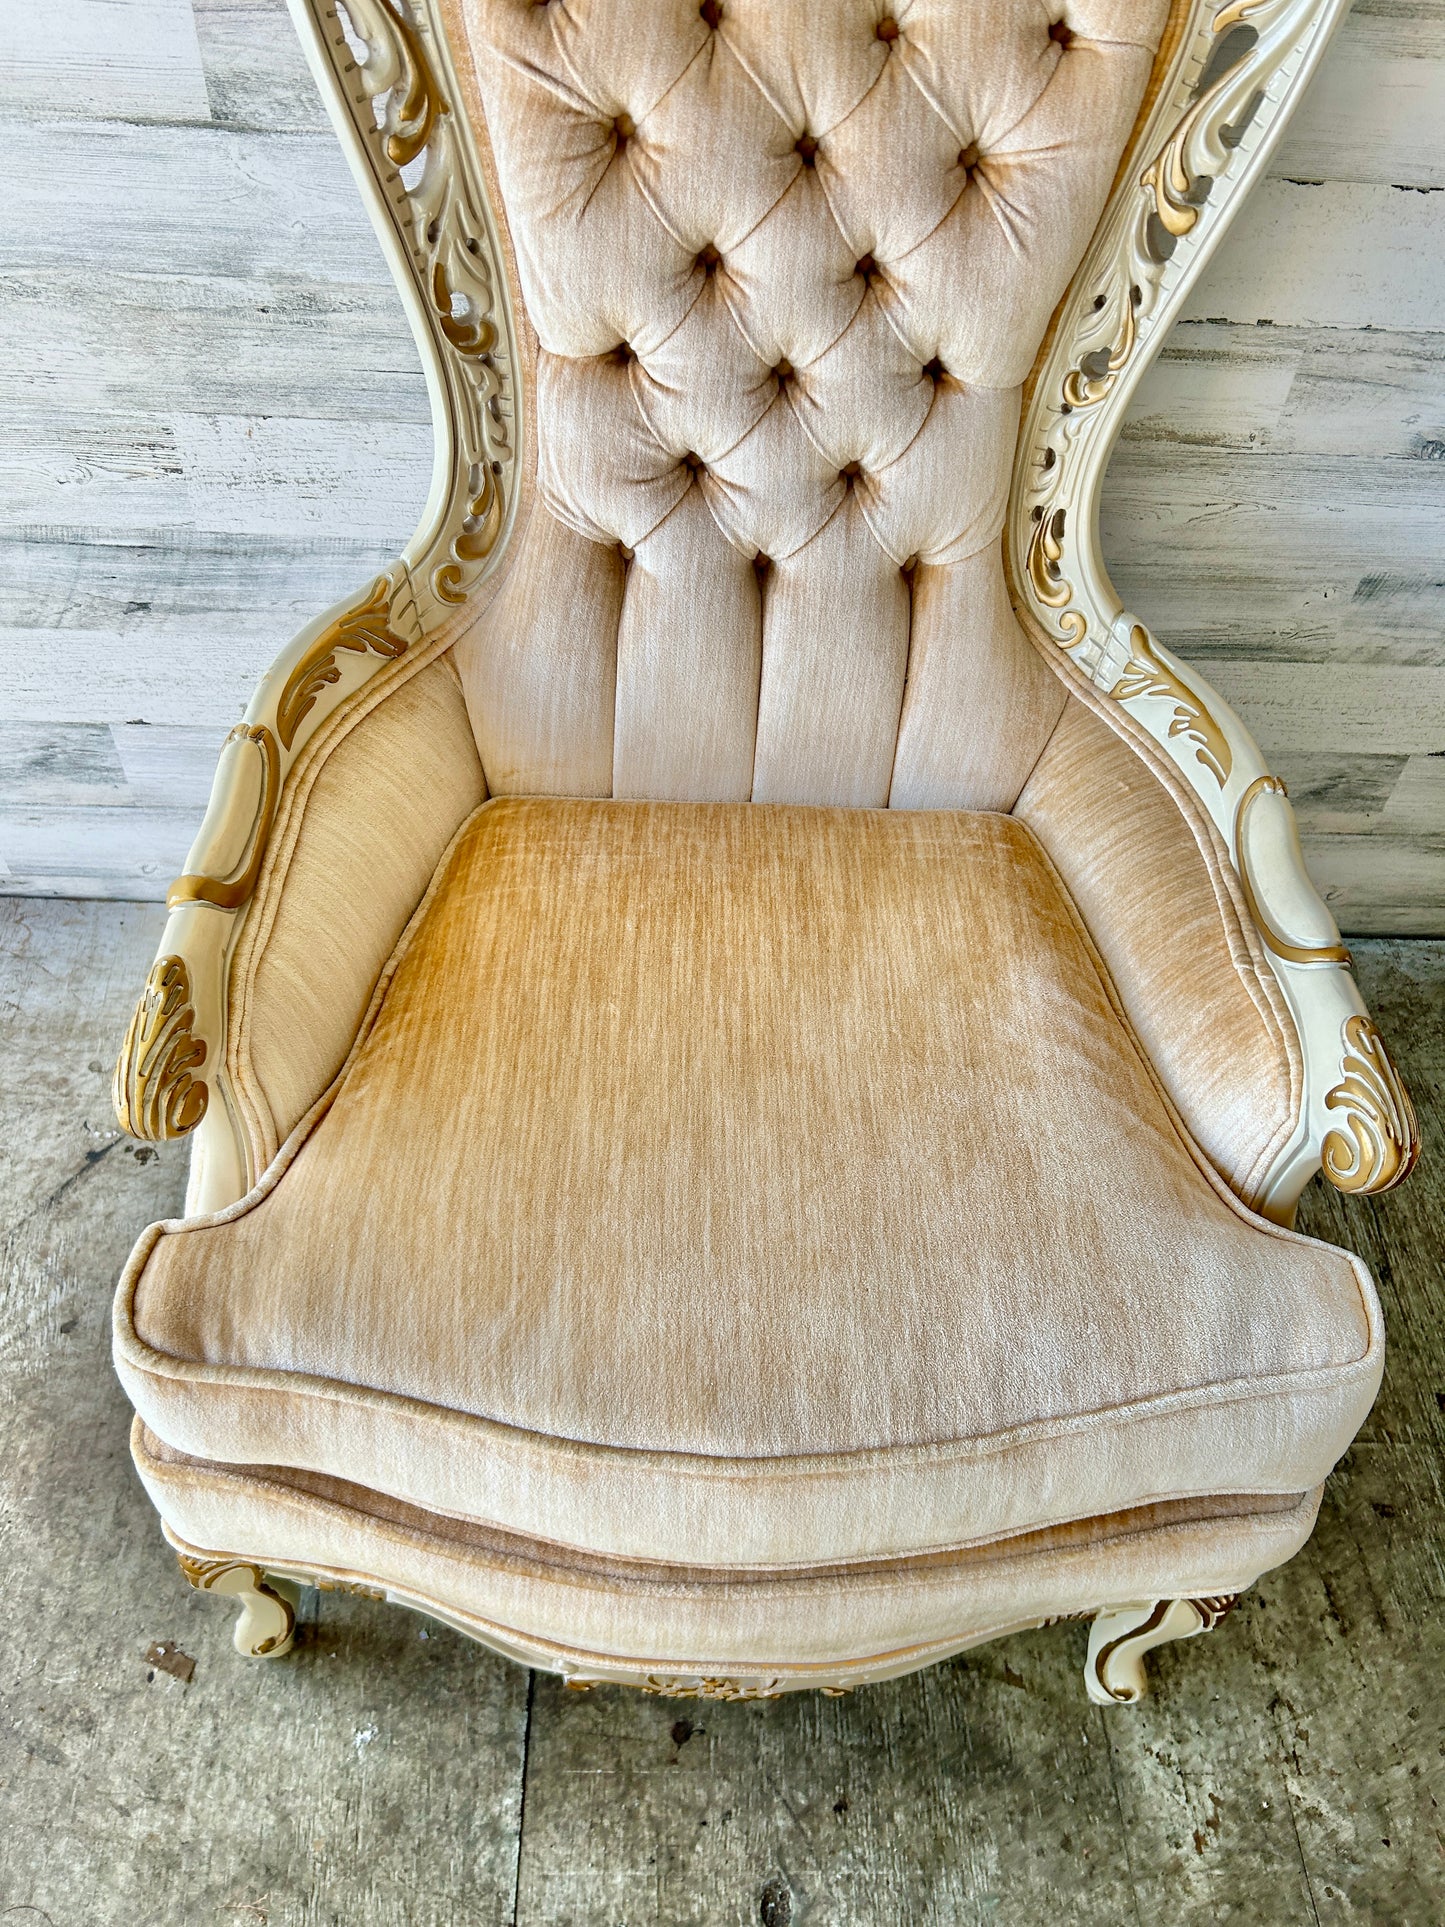 Vintage Hollywood Glam French Style Chair